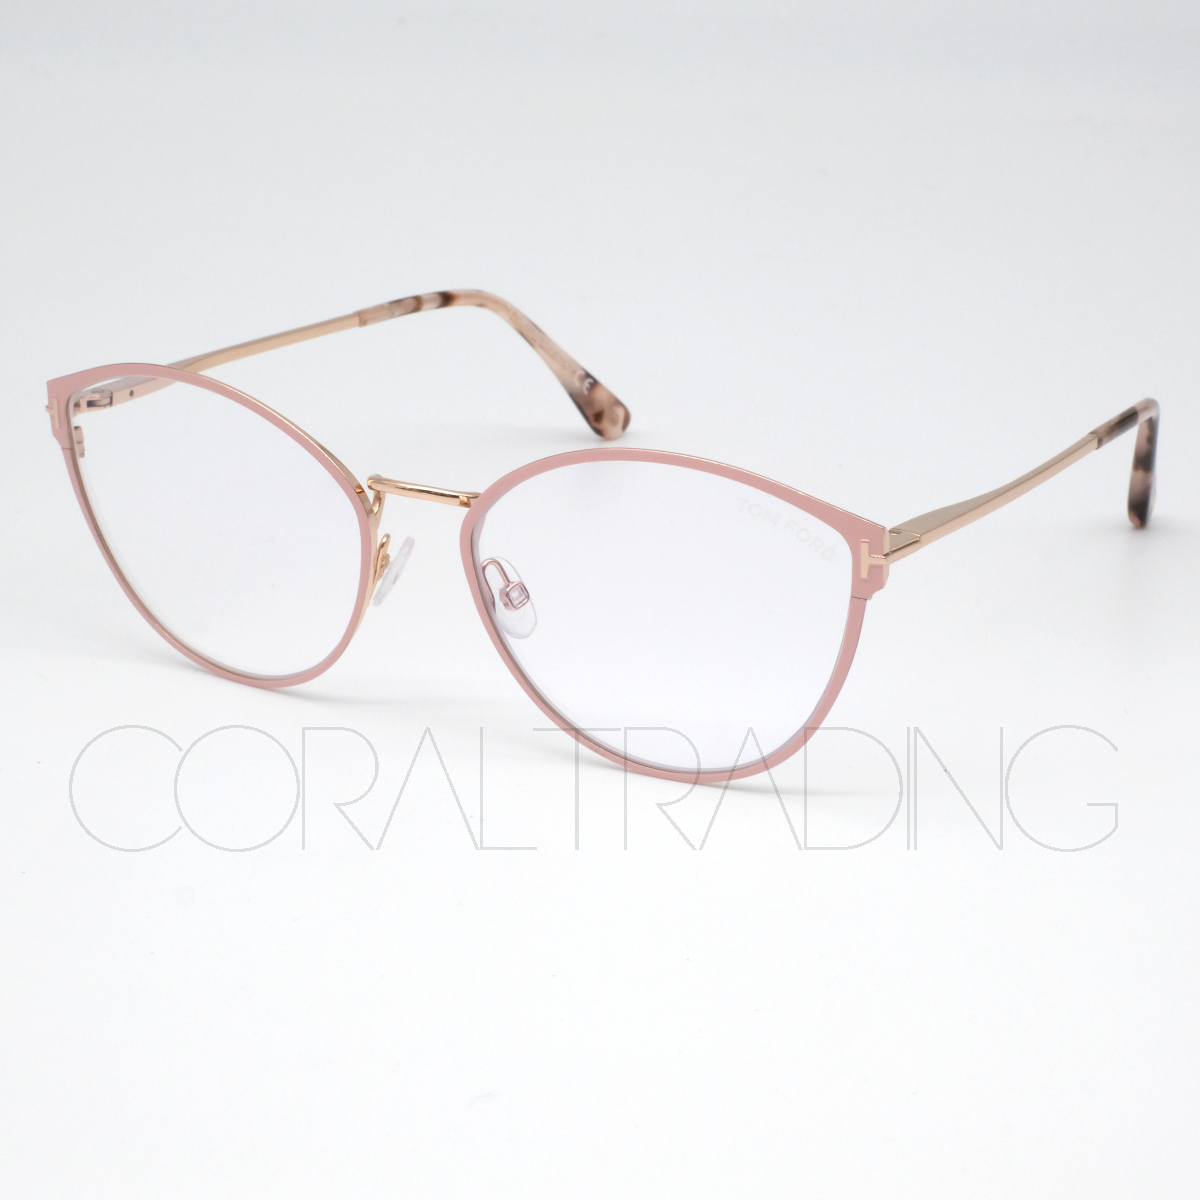 24079* new goods genuine article!TOMFORD TF5573-B 072 pink beige / Gold Tom Ford regular price 8 ten thousand super blue light cut lens glasses lady's 